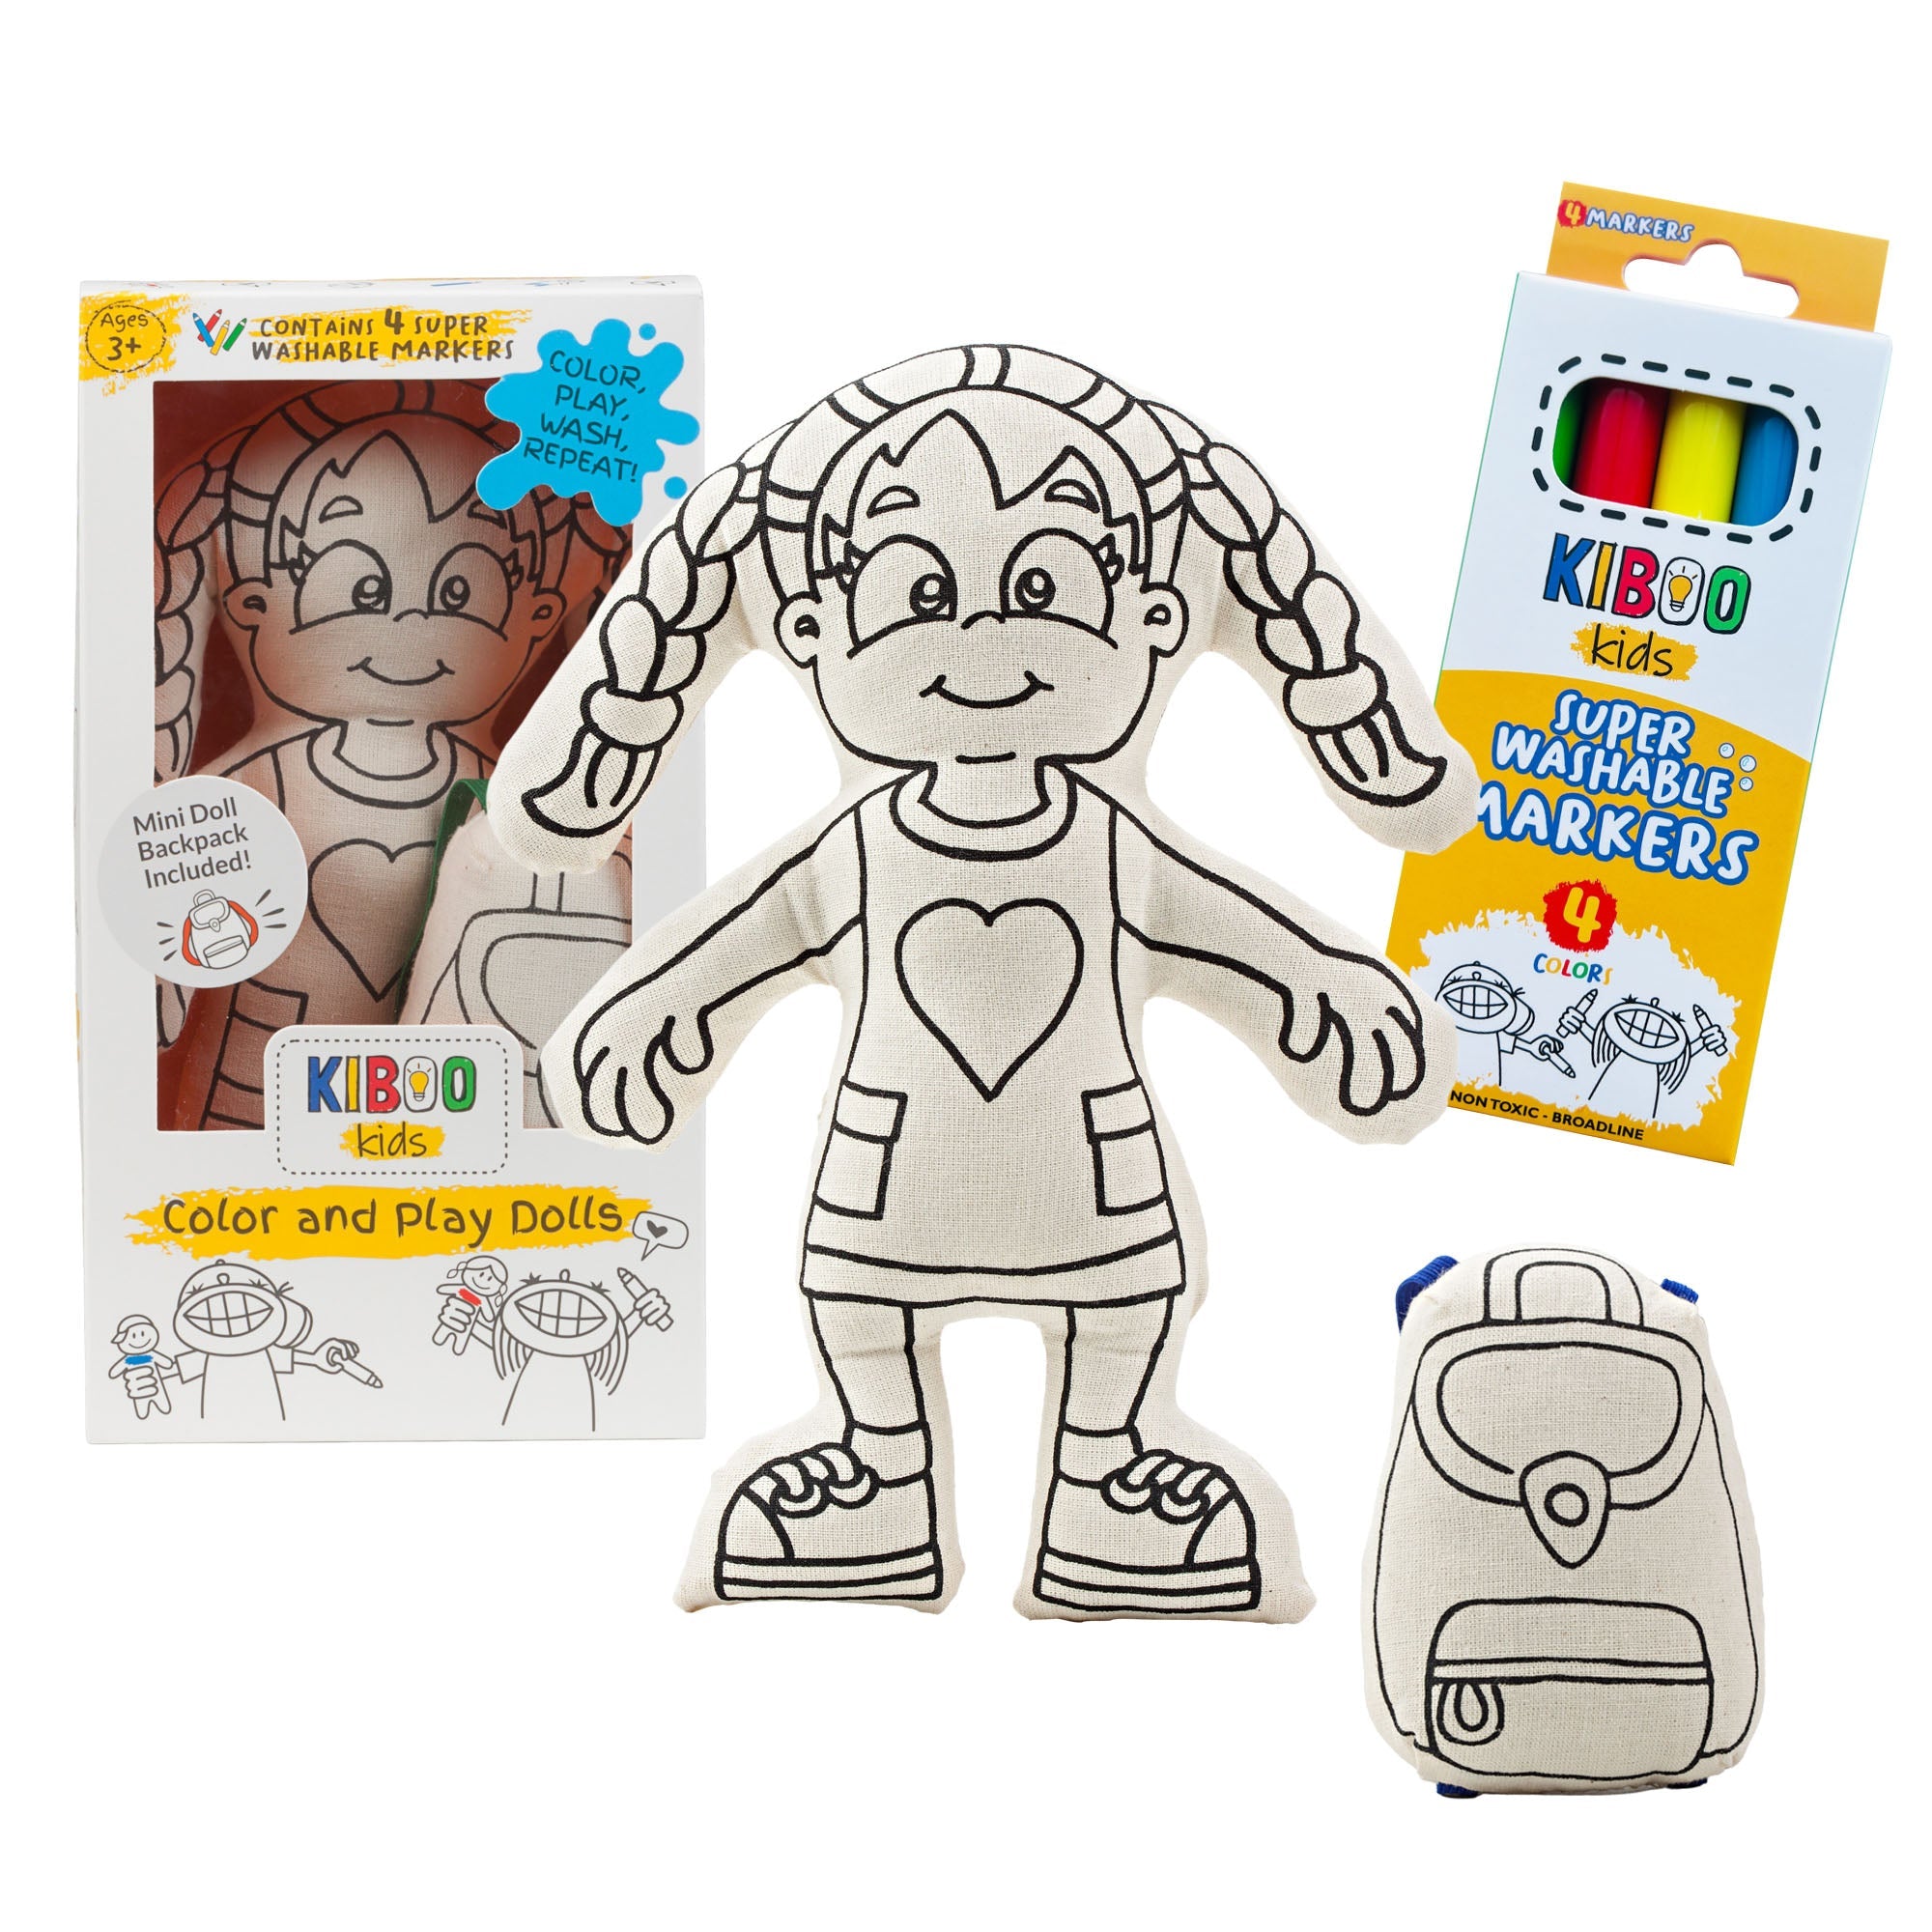 Kiboo Kids: Girl With Braids - Colorable And Washable Doll For Creative Play